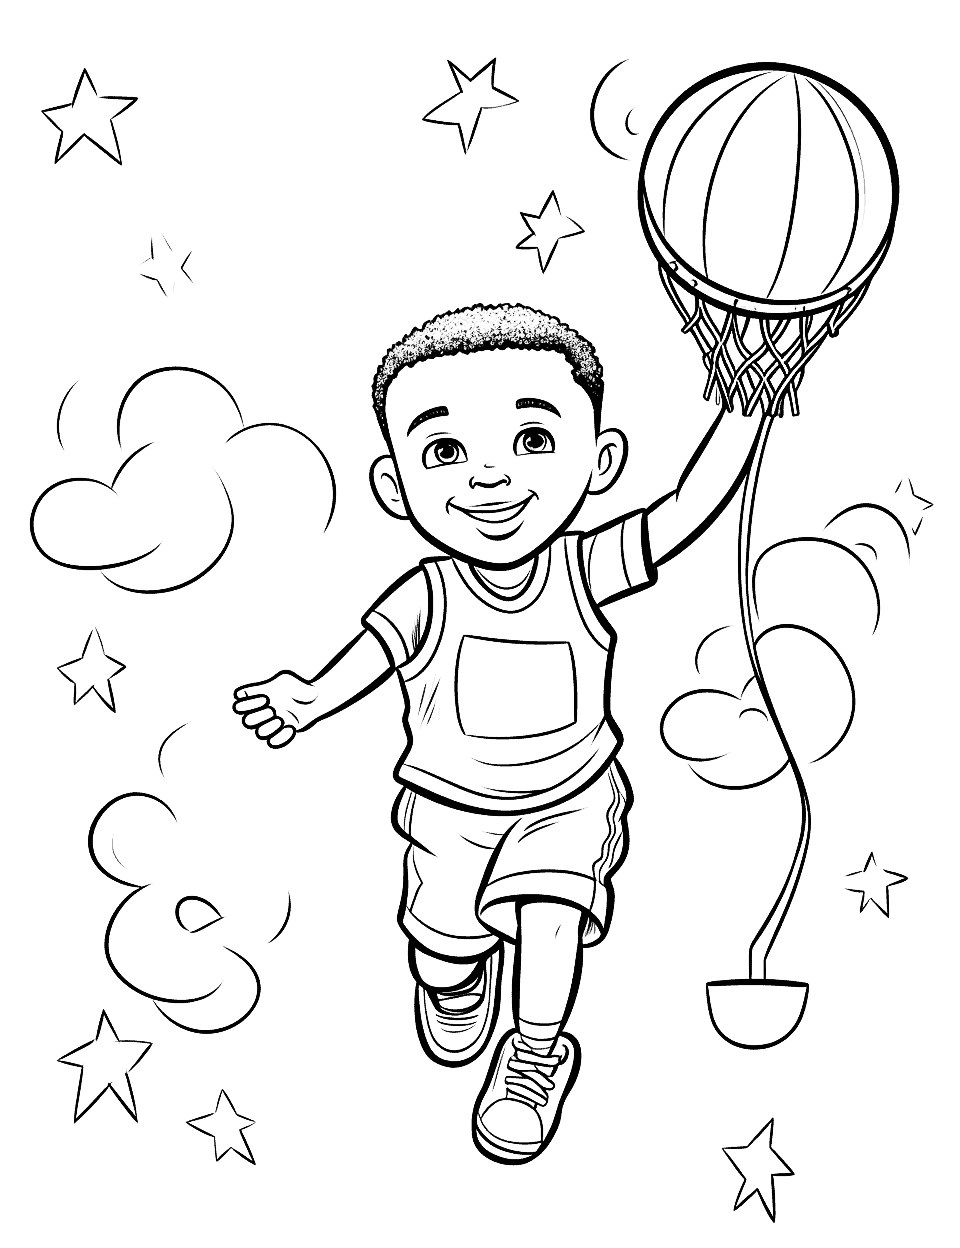 Basketball Star's Birthday Happy Coloring Page - A young basketball player scoring a birthday slam dunk.